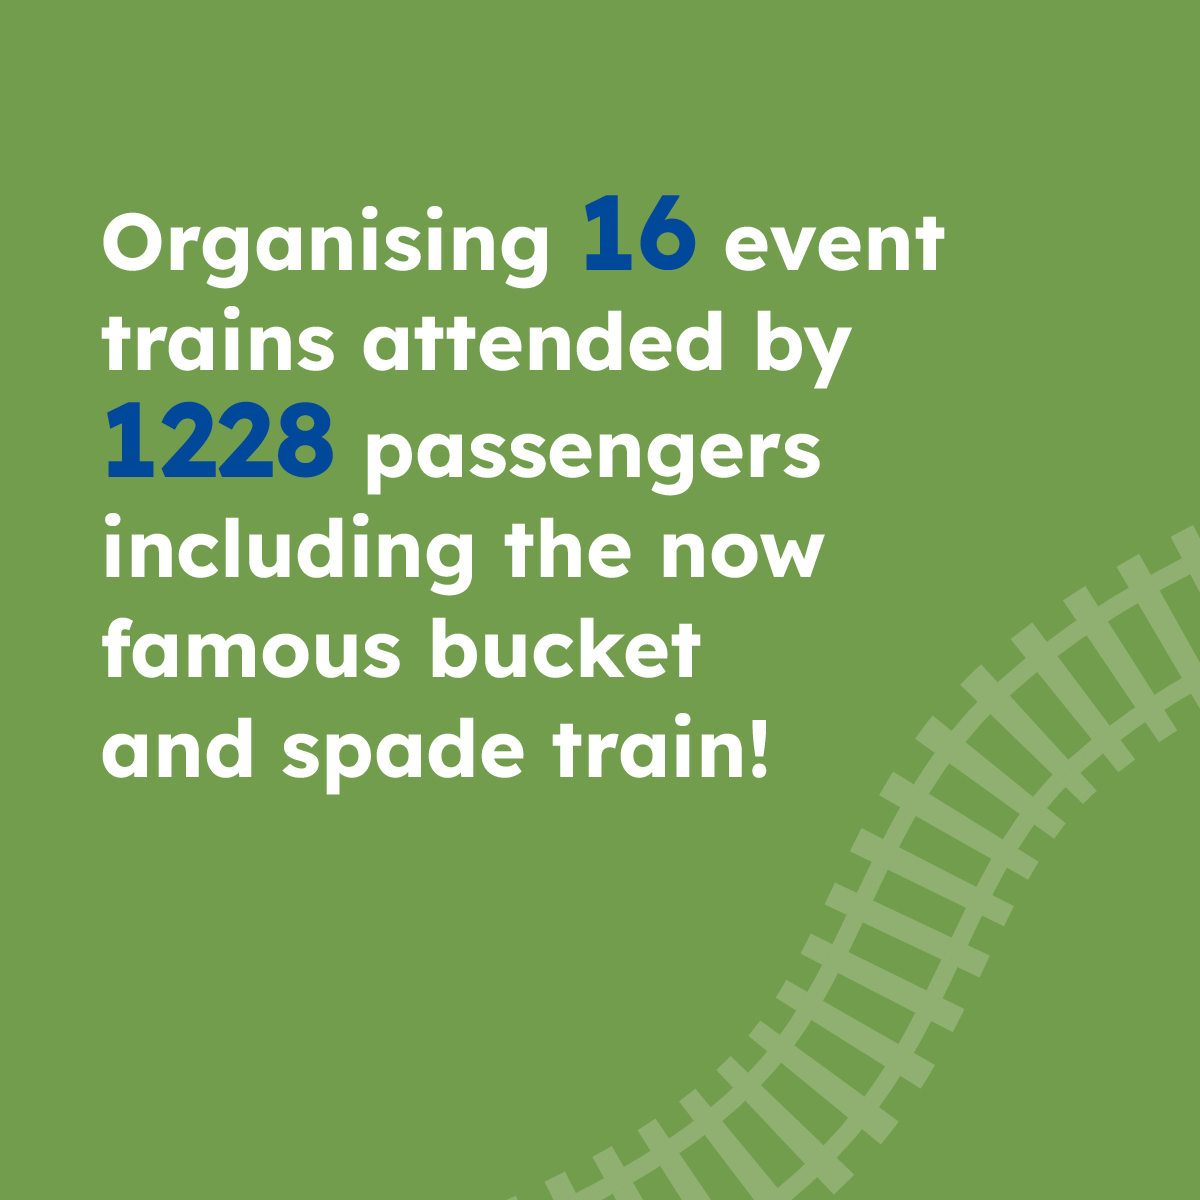 Organising 16 event trains attended by 1228 passengers including the now famous bucket and spade train!